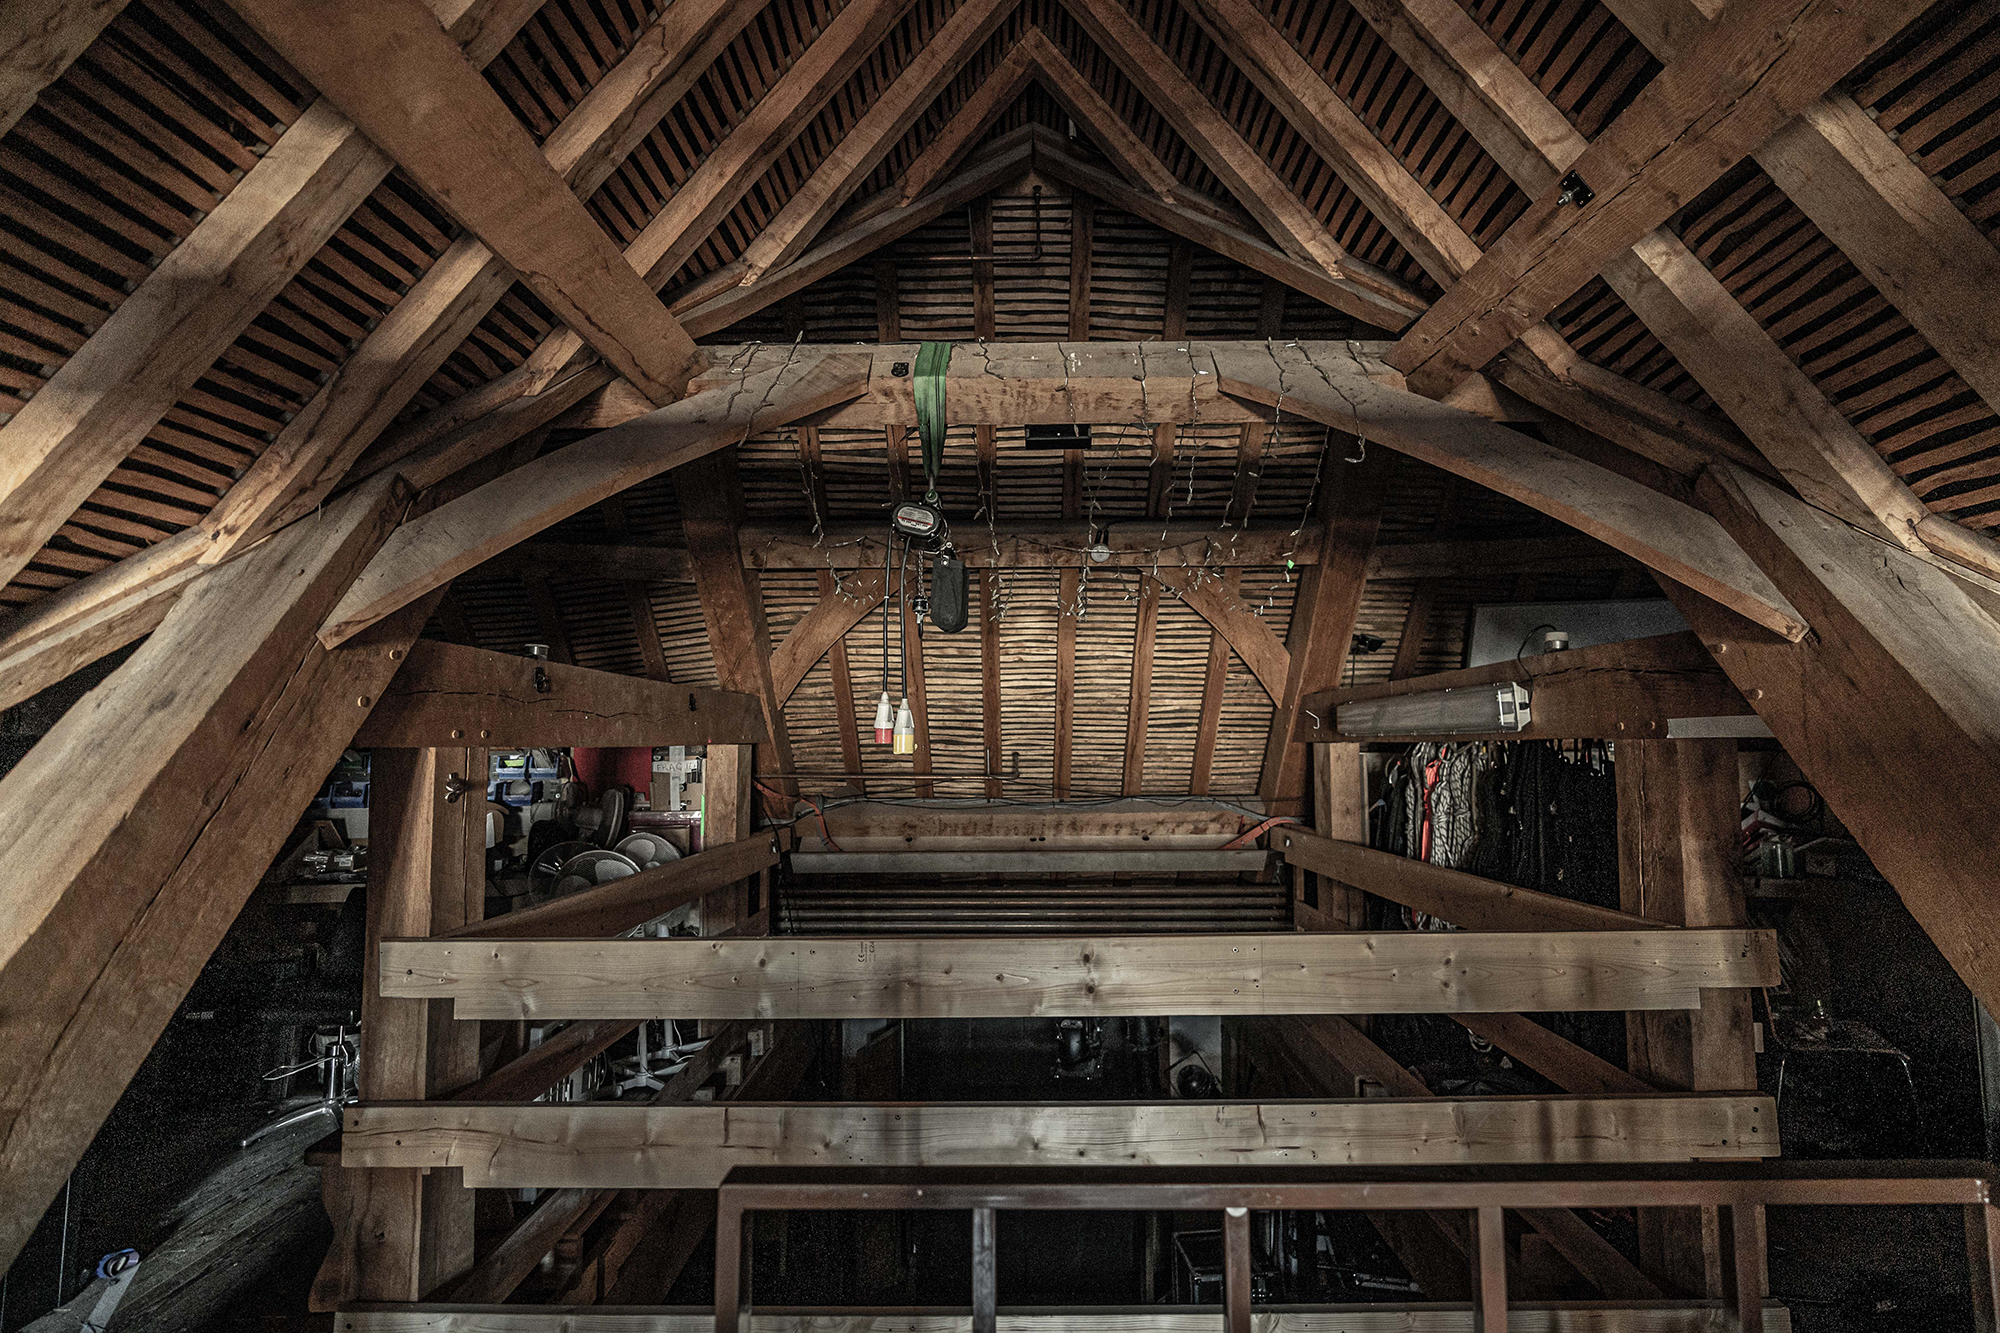 The inside of an attic with thatch roof and great oak beams. Various cables and objects hang from the rafters.